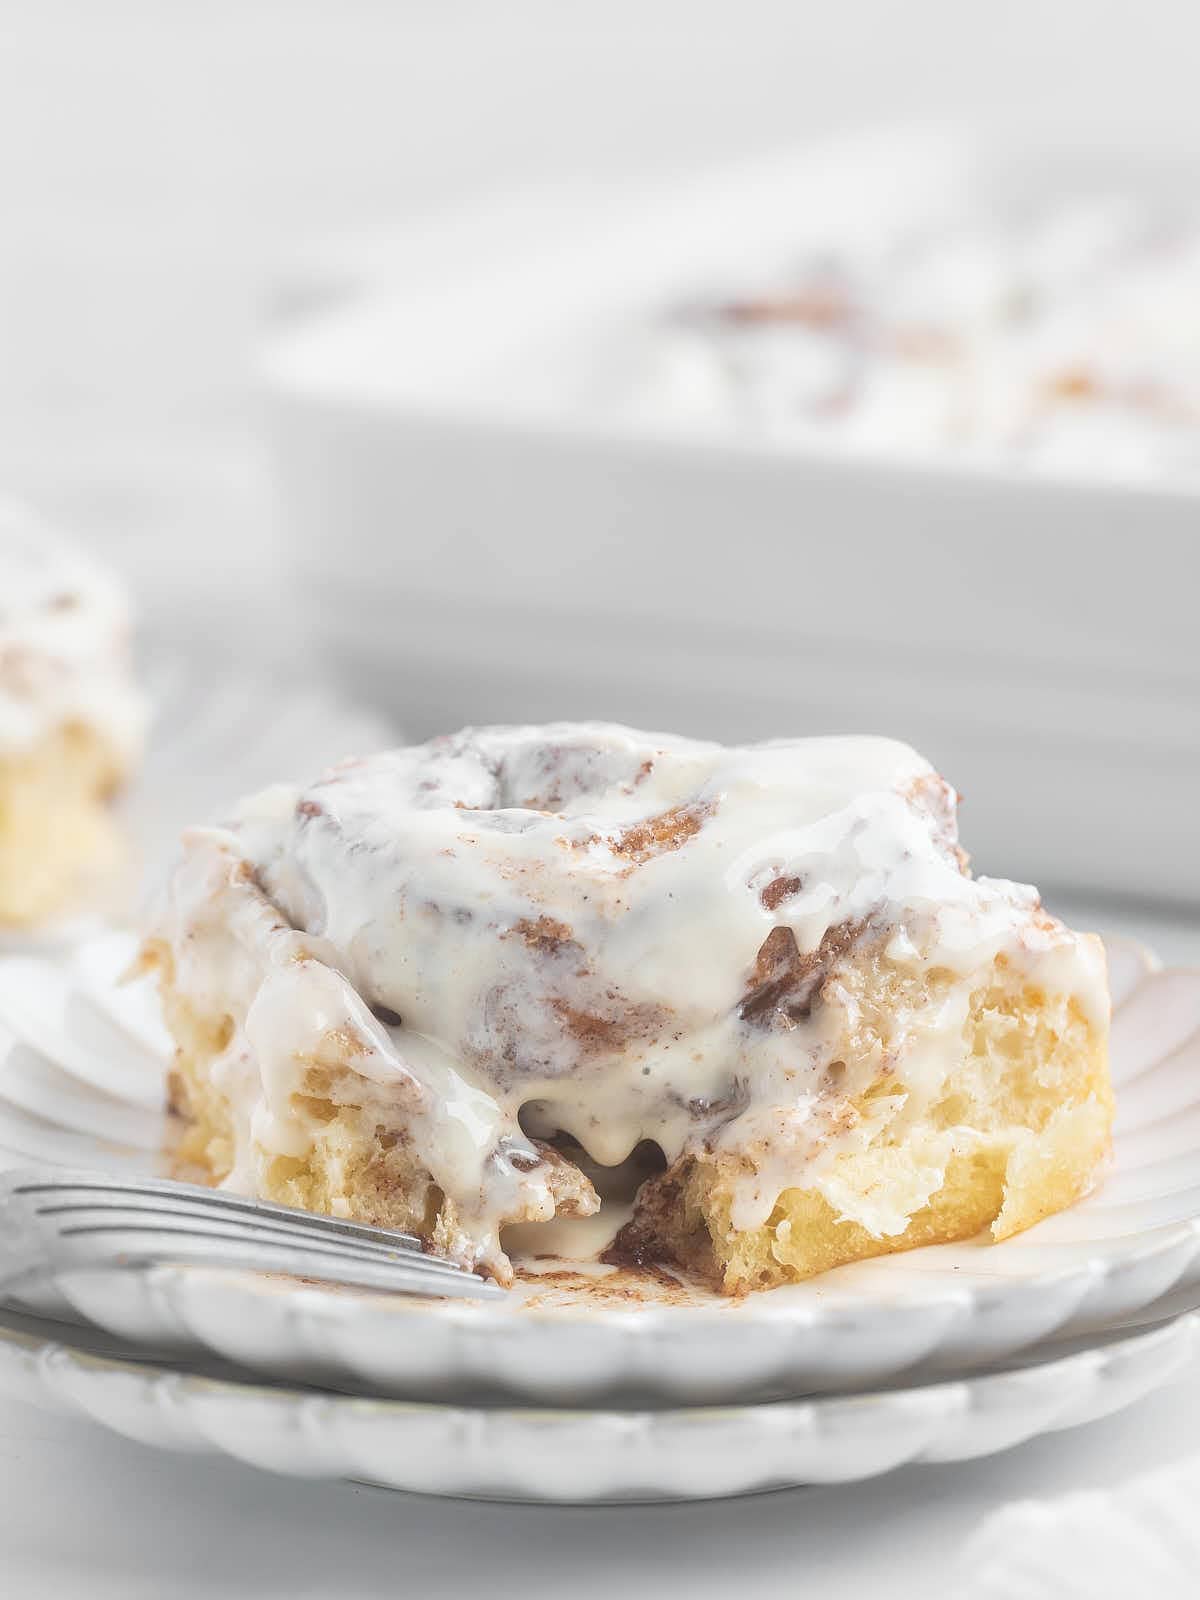 Freshly baked Cinnamon Rolls on a plate drizzled with icing, ready to be enjoyed with a fork.